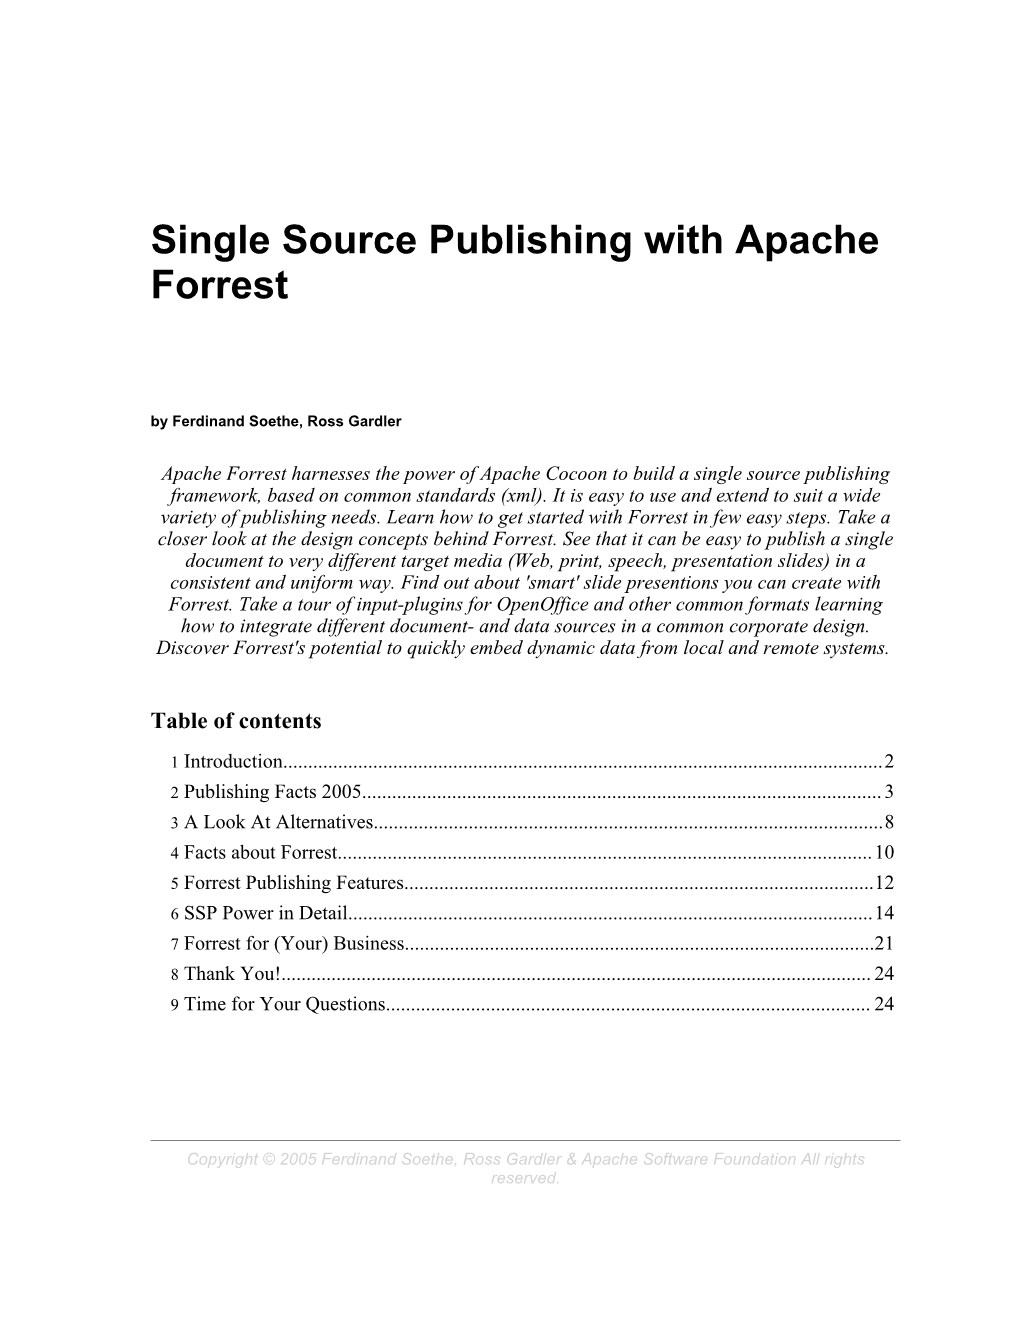 Single Source Publishing with Apache Forrest